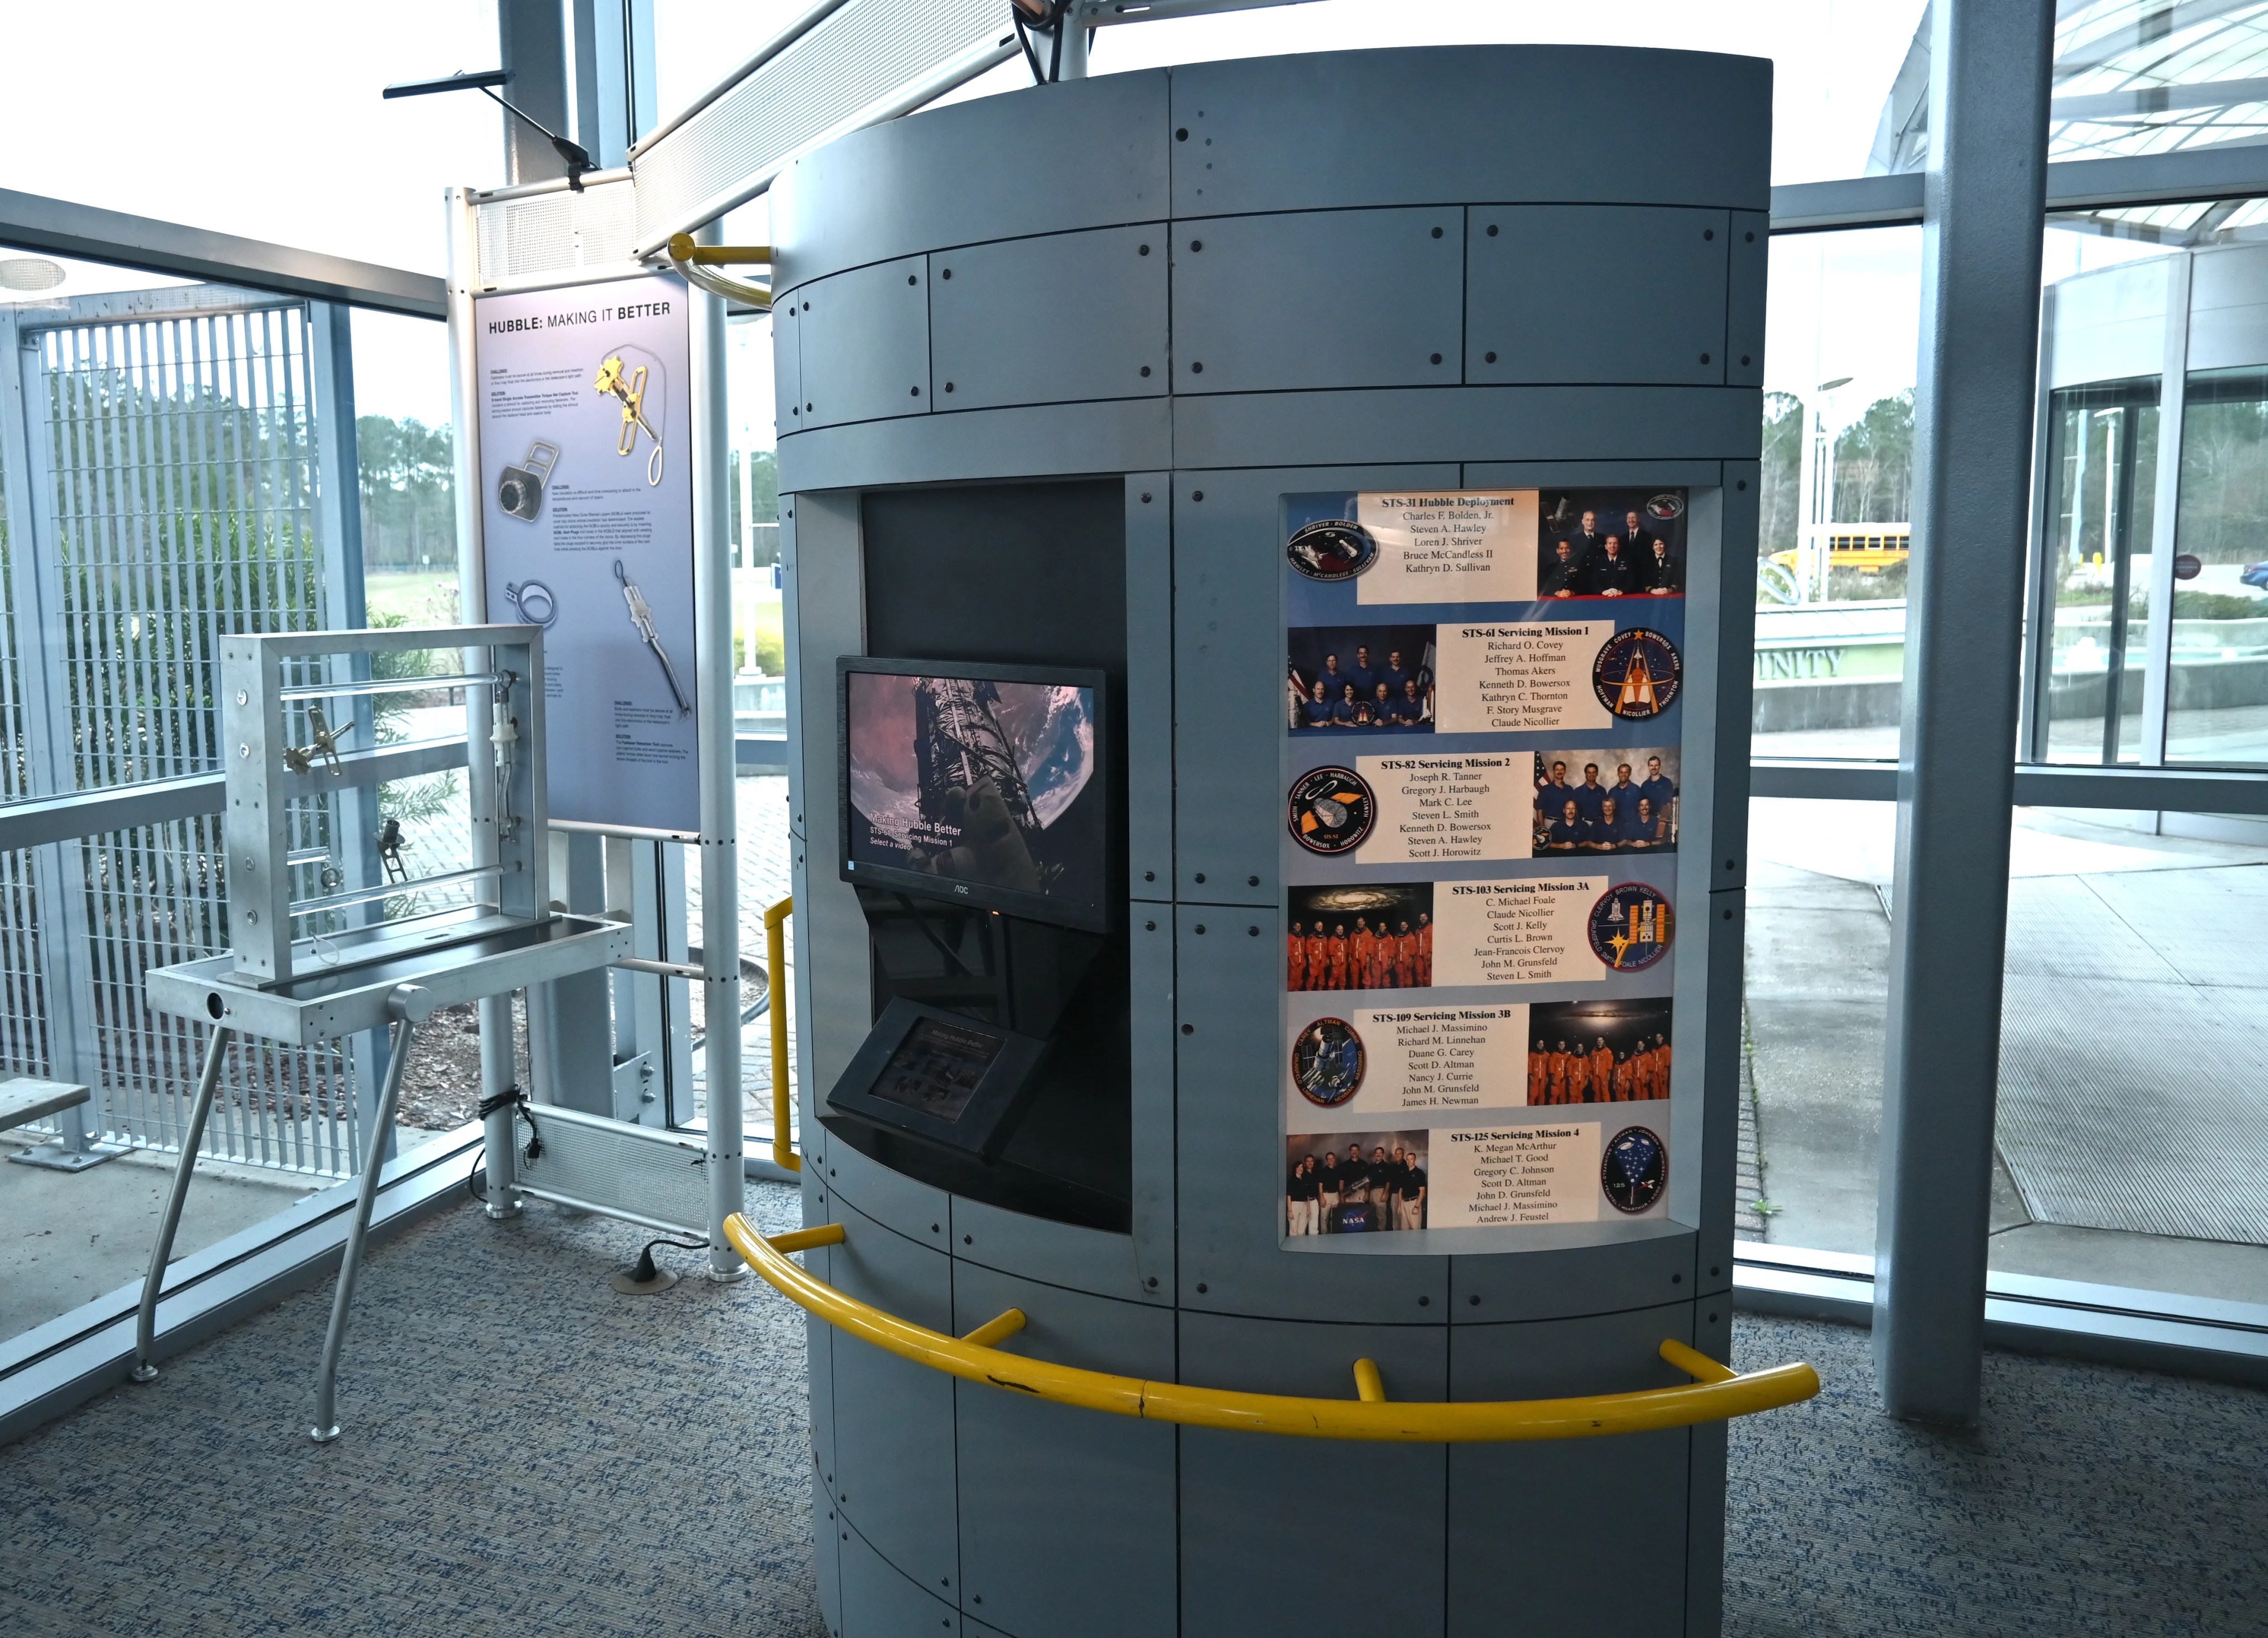 The HST servicing mission station highlighting each mission and the tools used by the astronauts